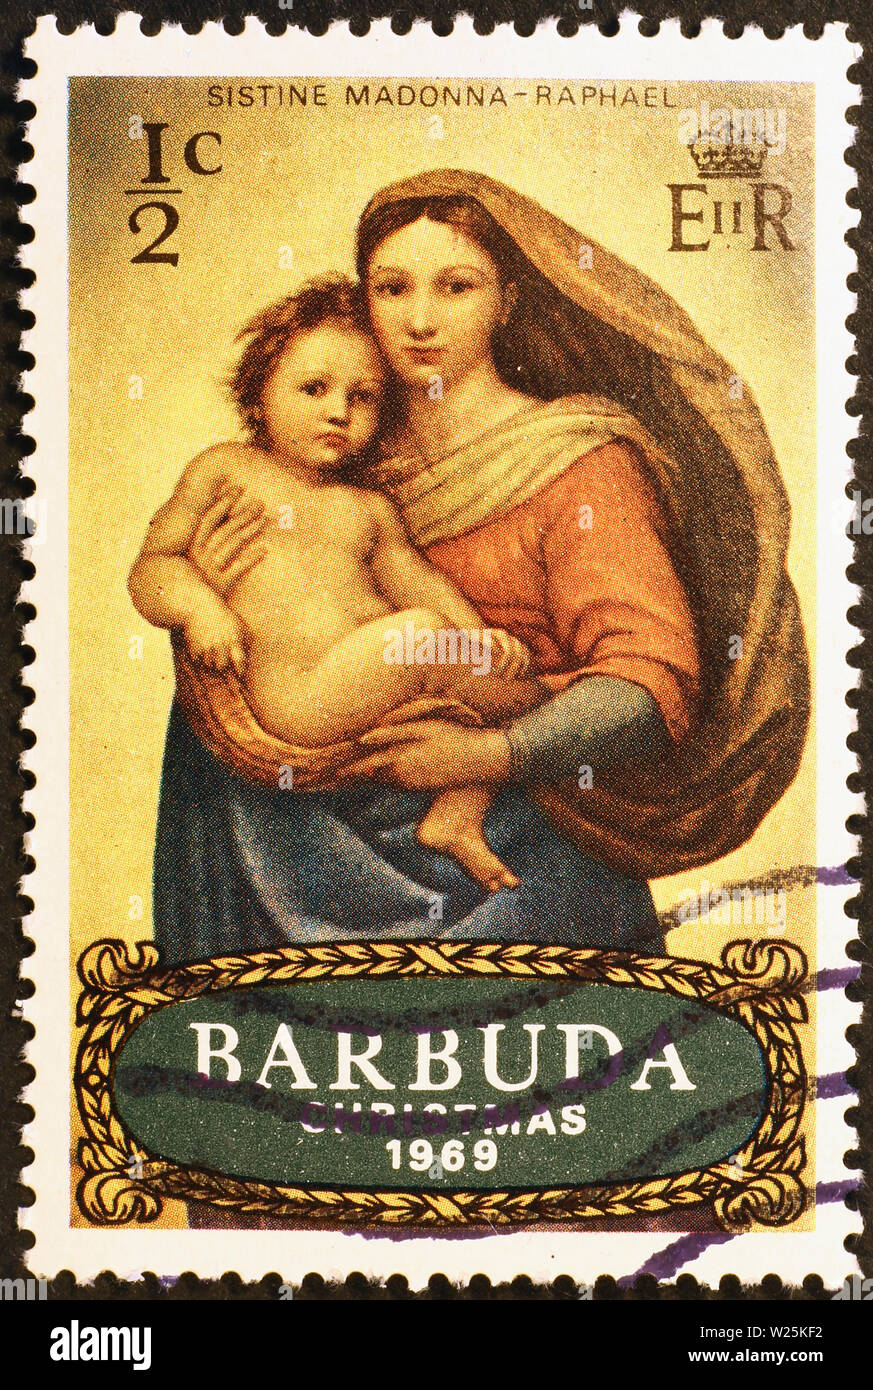 Madonna by Raphael in Sistine Chapel on stamp Stock Photo